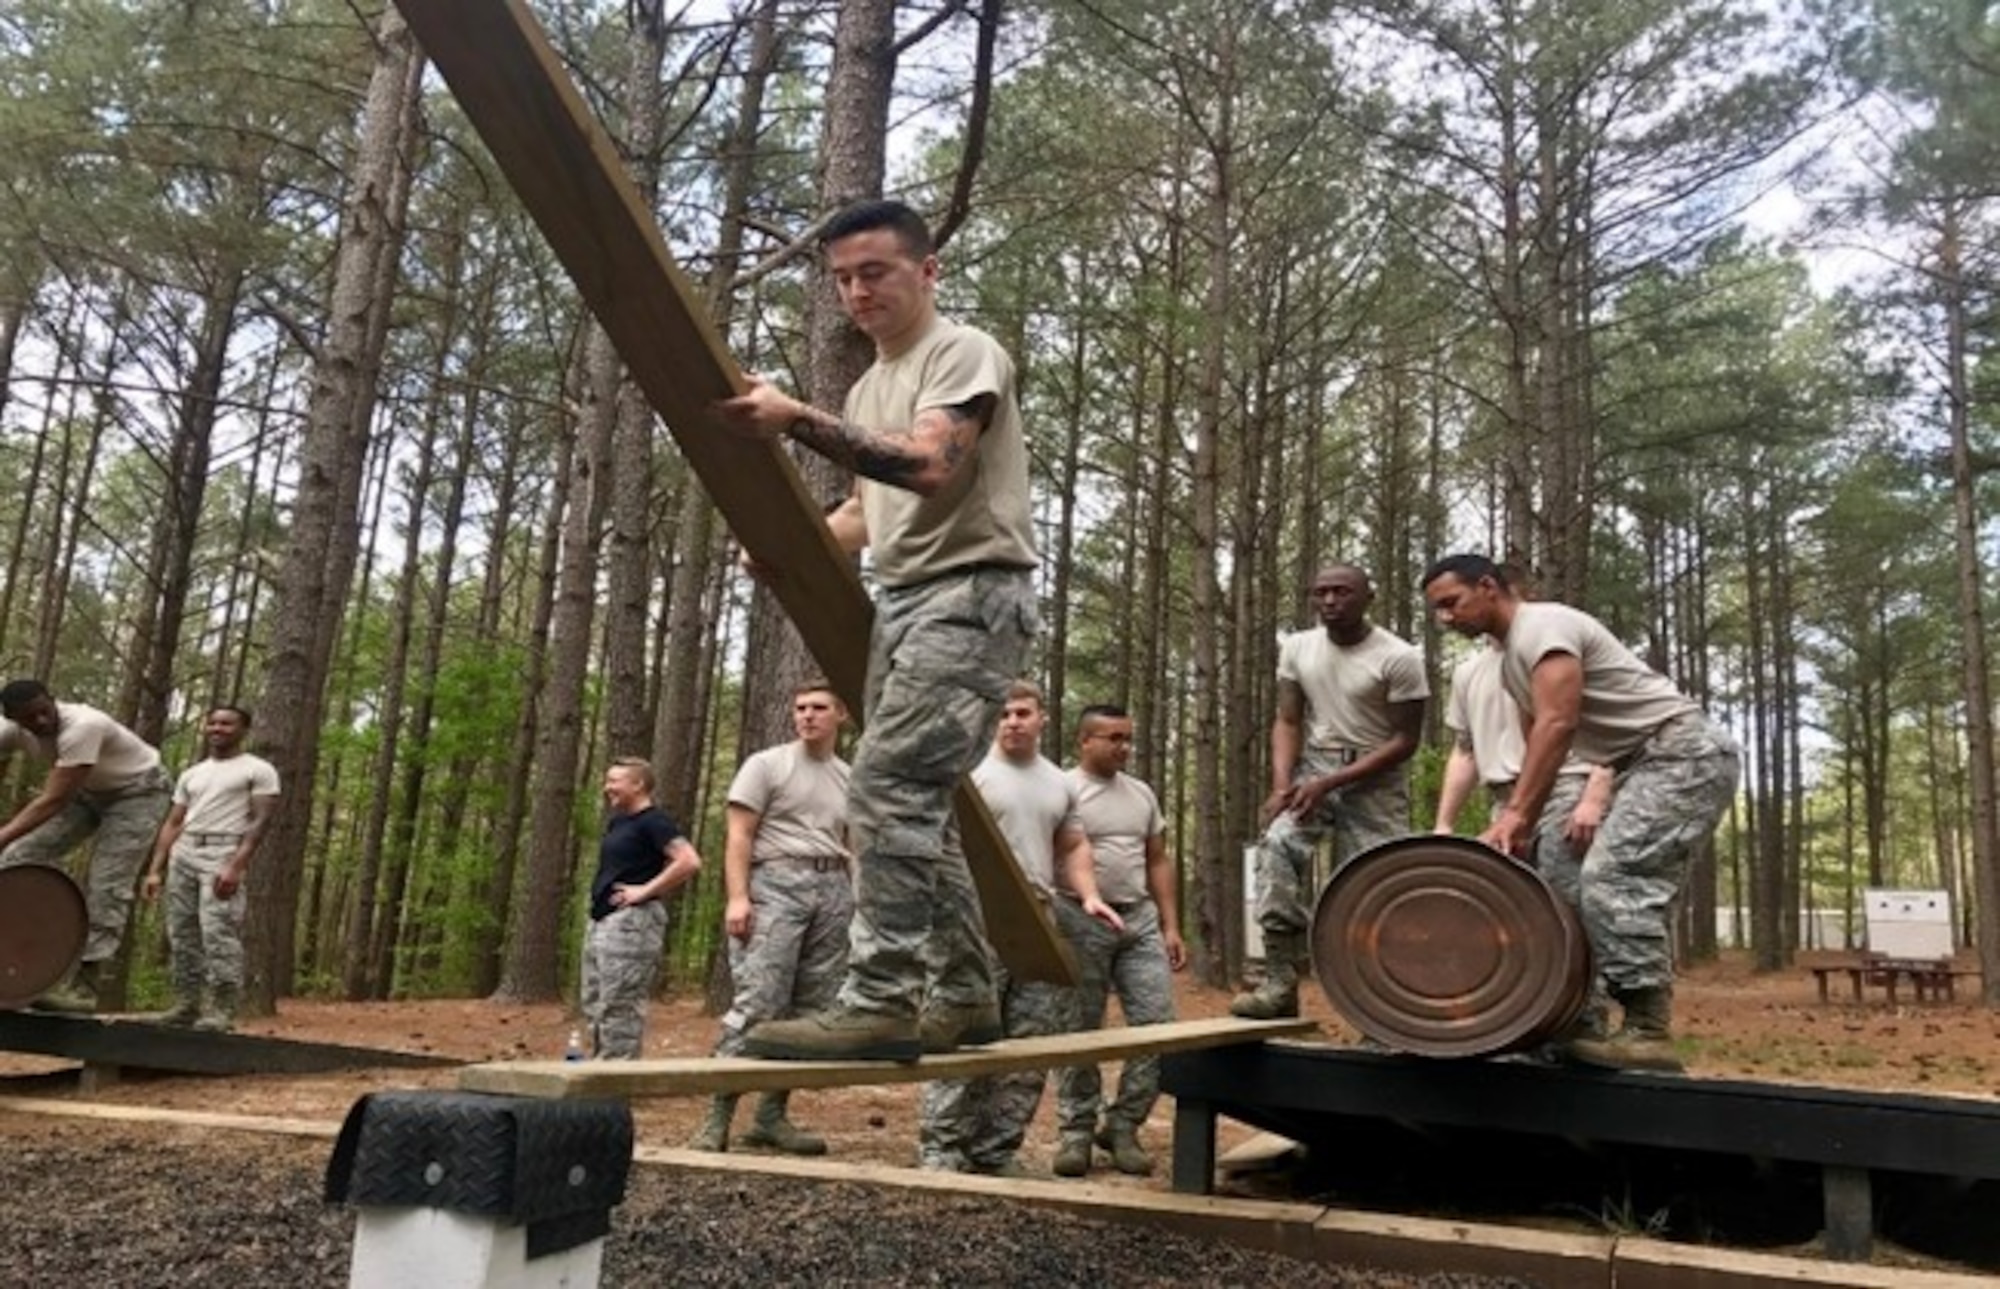 U.S. Airmen assigned to the 20th Logistics Readiness Squadron work together during “range control,” or an obstacle course, at Fort Jackson, S.C., 2018.